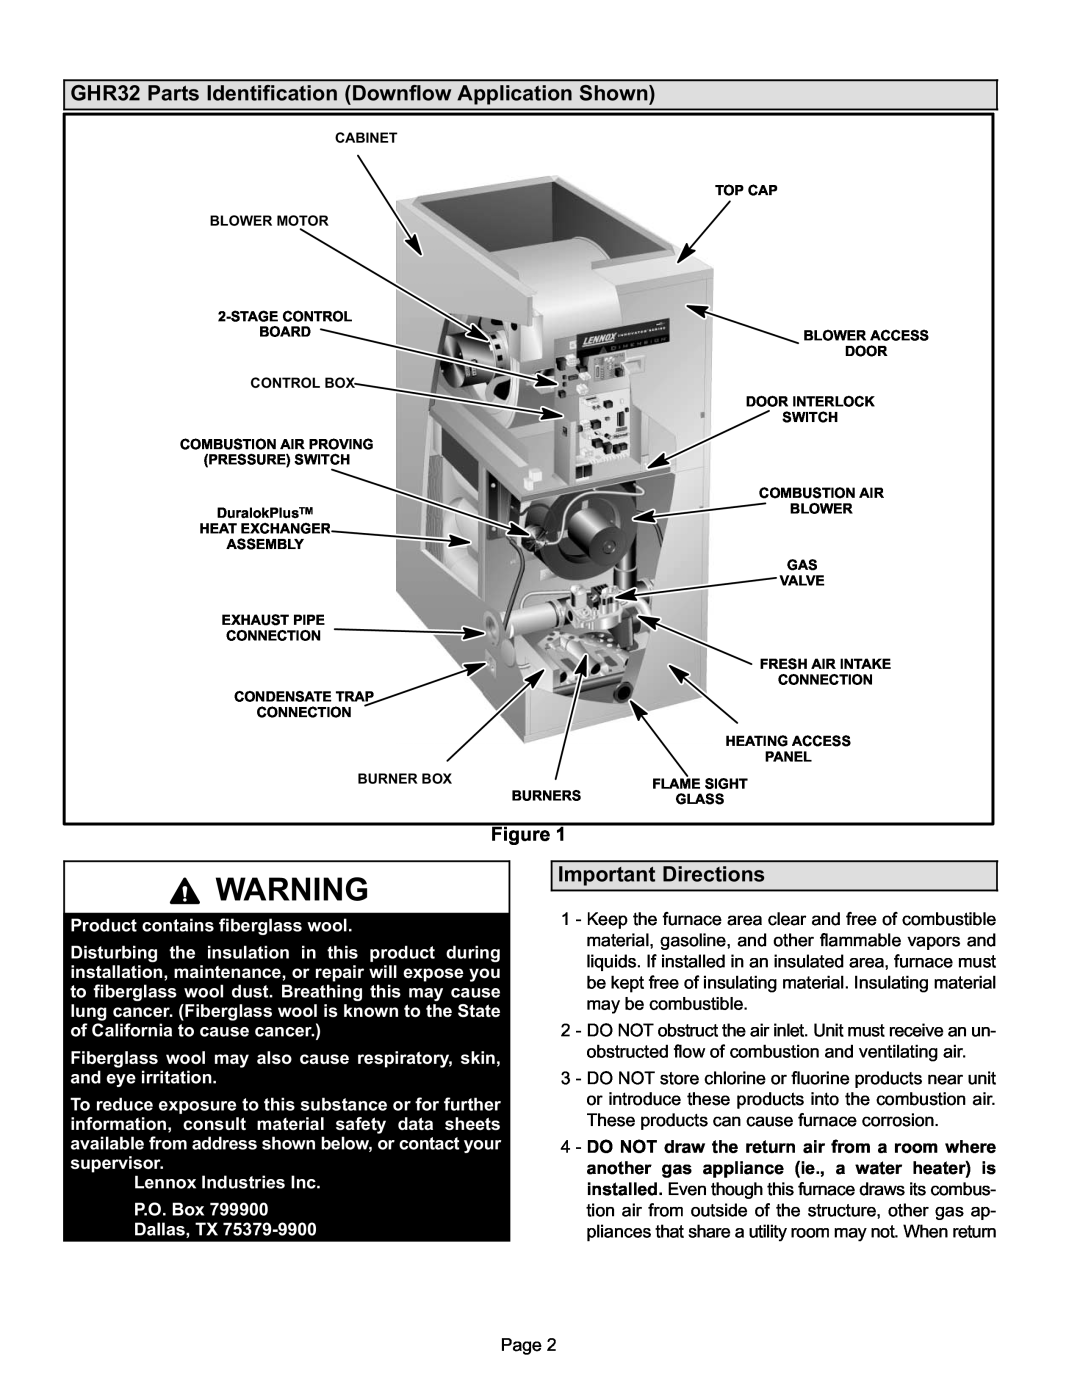 Lennox International Inc manual GHR32 Parts Identification Downflow Application Shown, Important Directions 